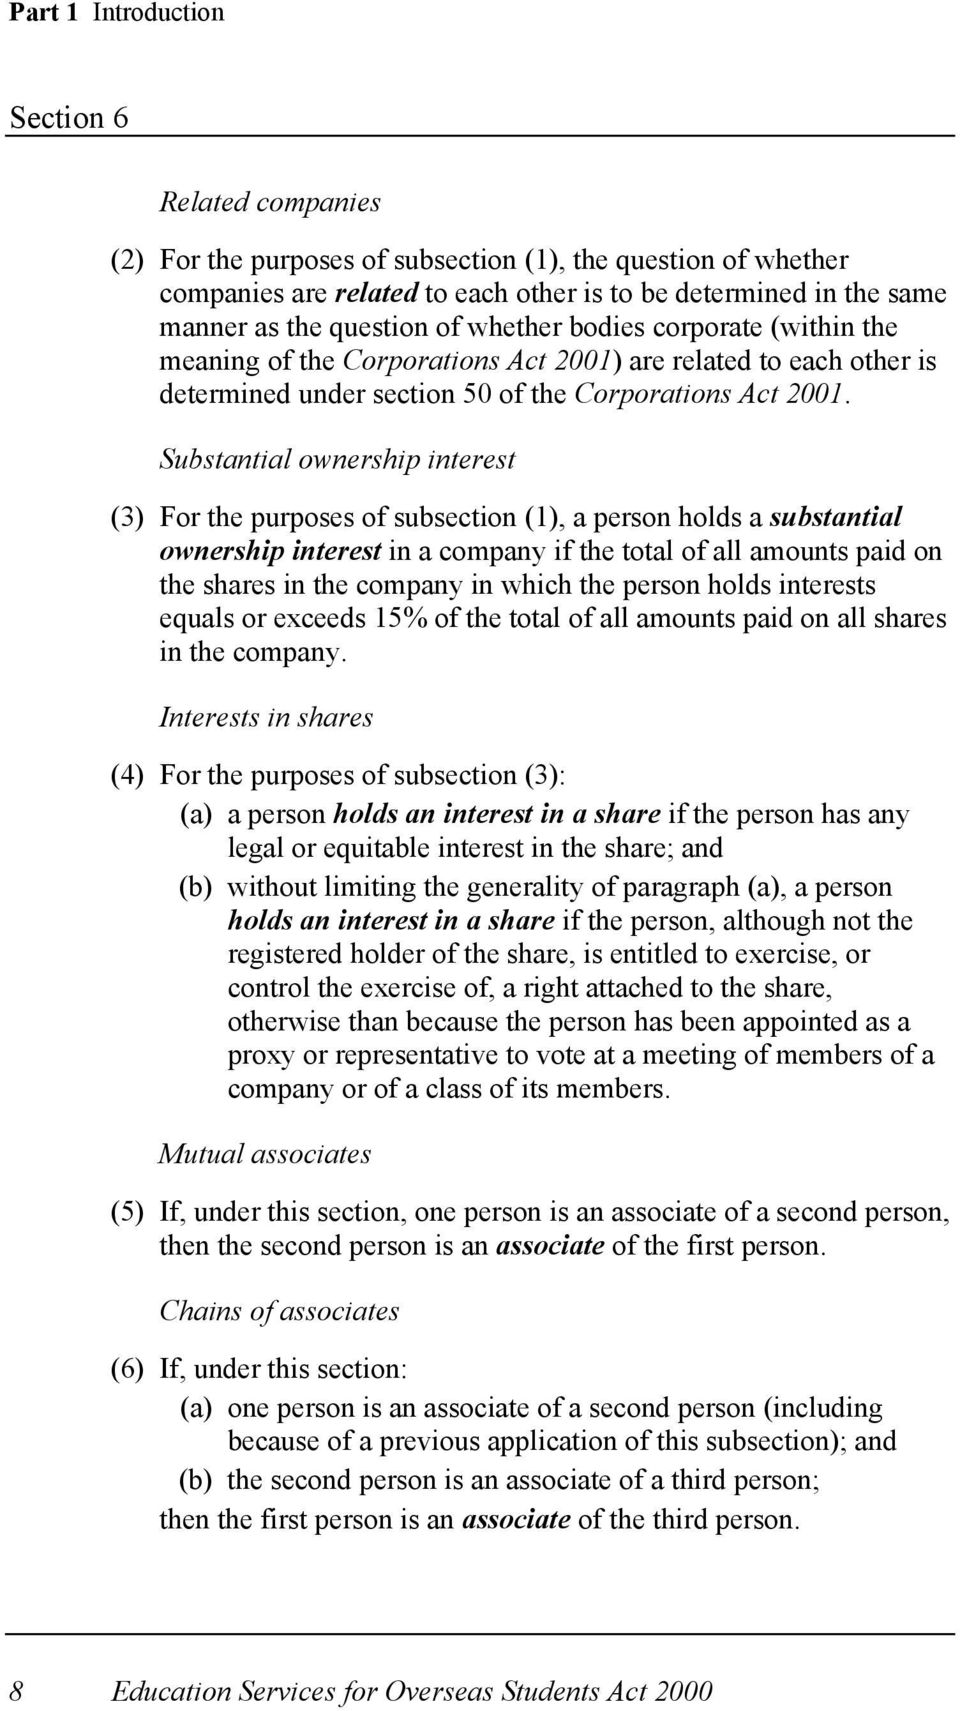 Substantial ownership interest (3) For the purposes of subsection (1), a person holds a substantial ownership interest in a company if the total of all amounts paid on the shares in the company in